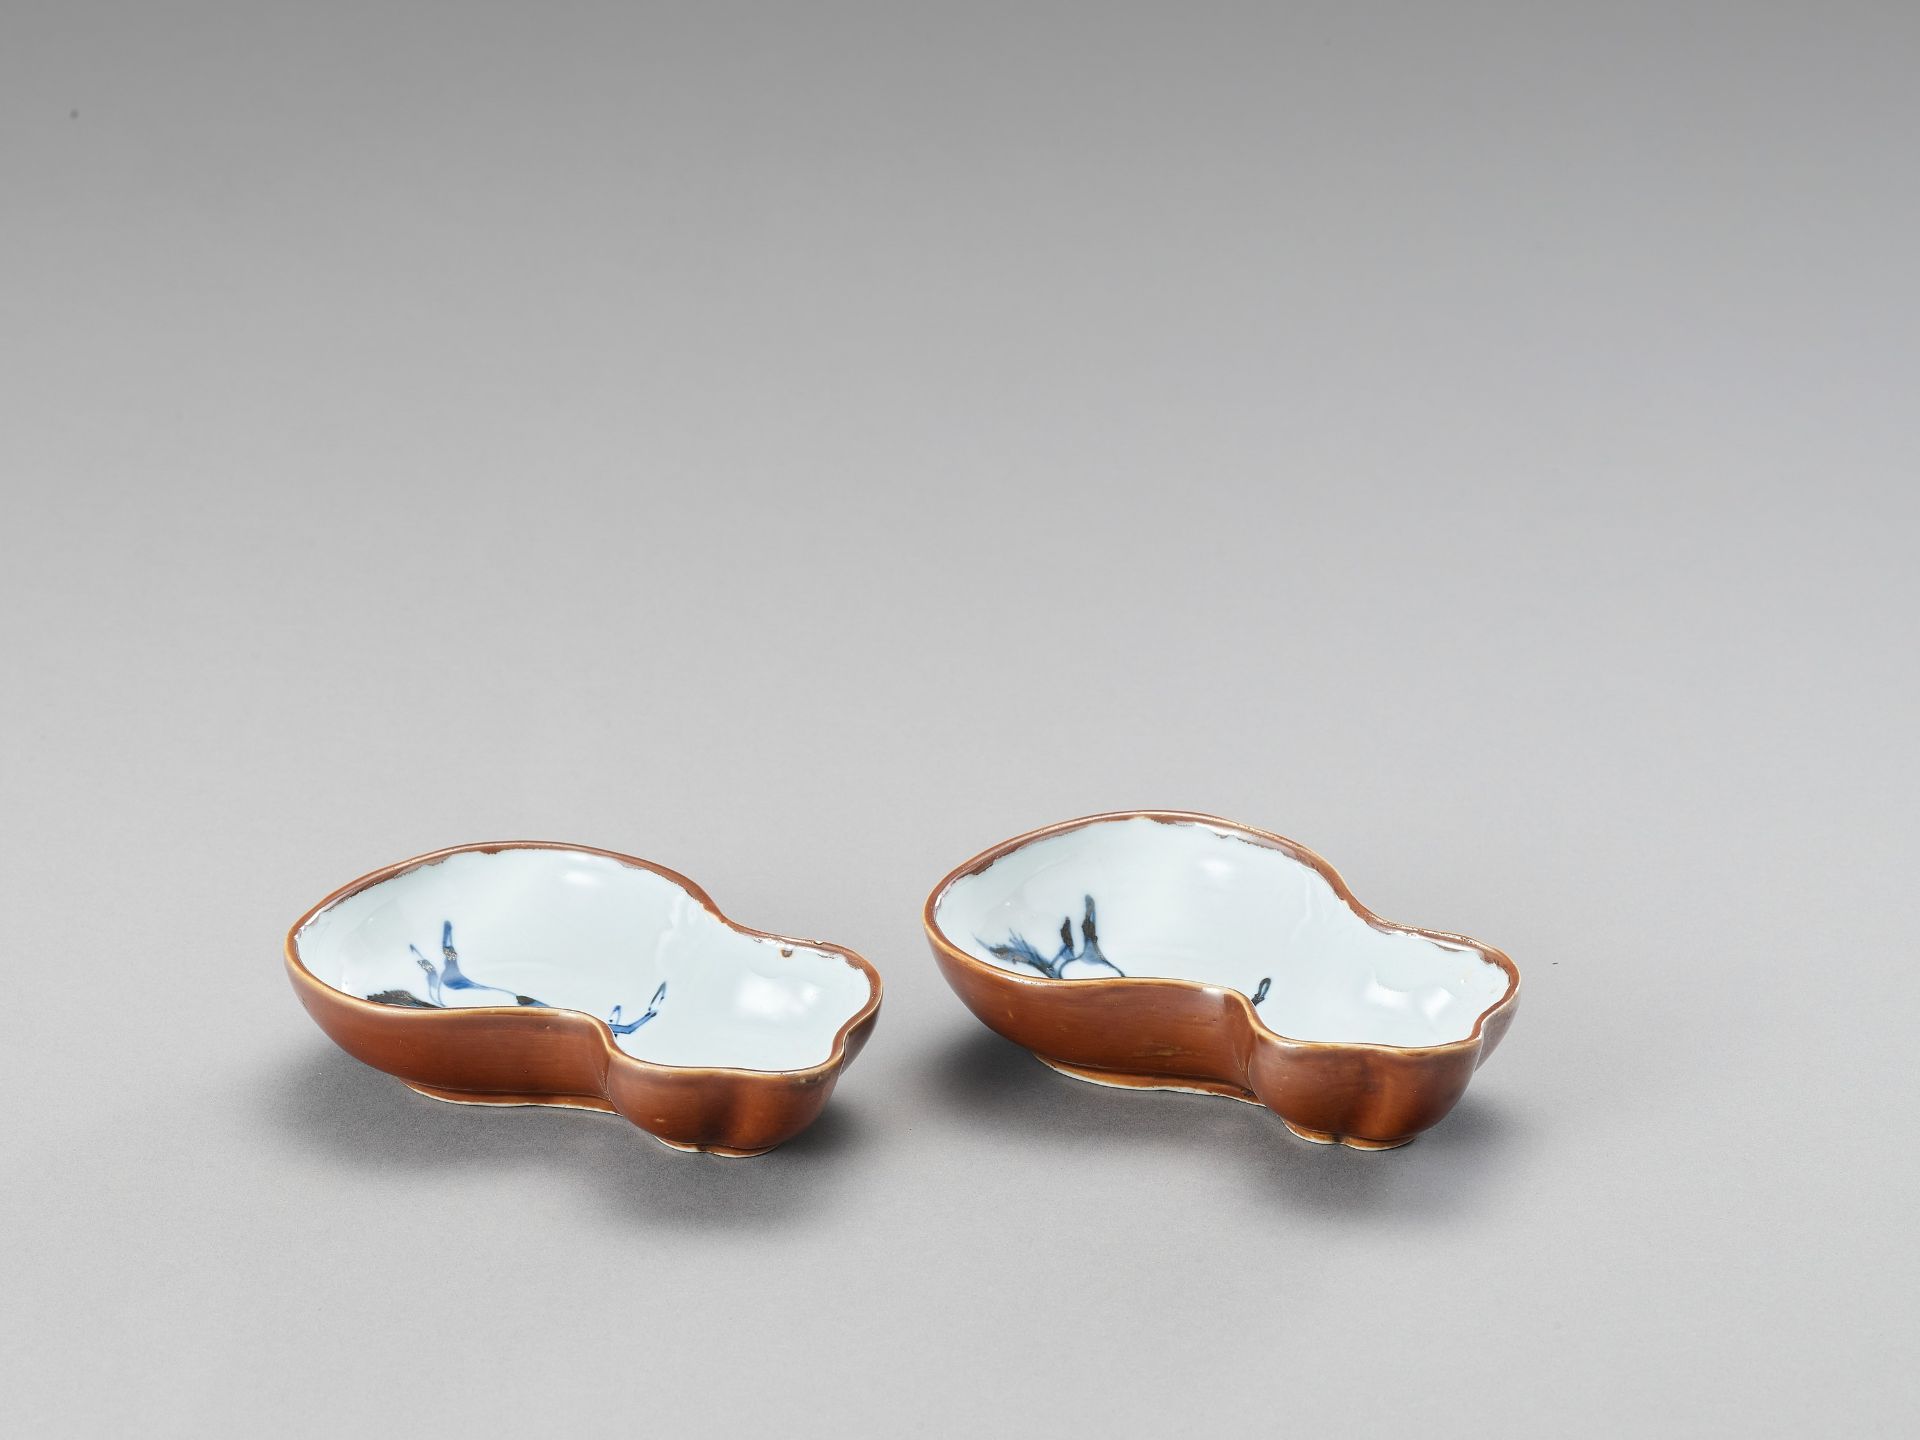 A PAIR OF GOURD-SHAPED PORCELAIN SAUCERS - Image 2 of 4